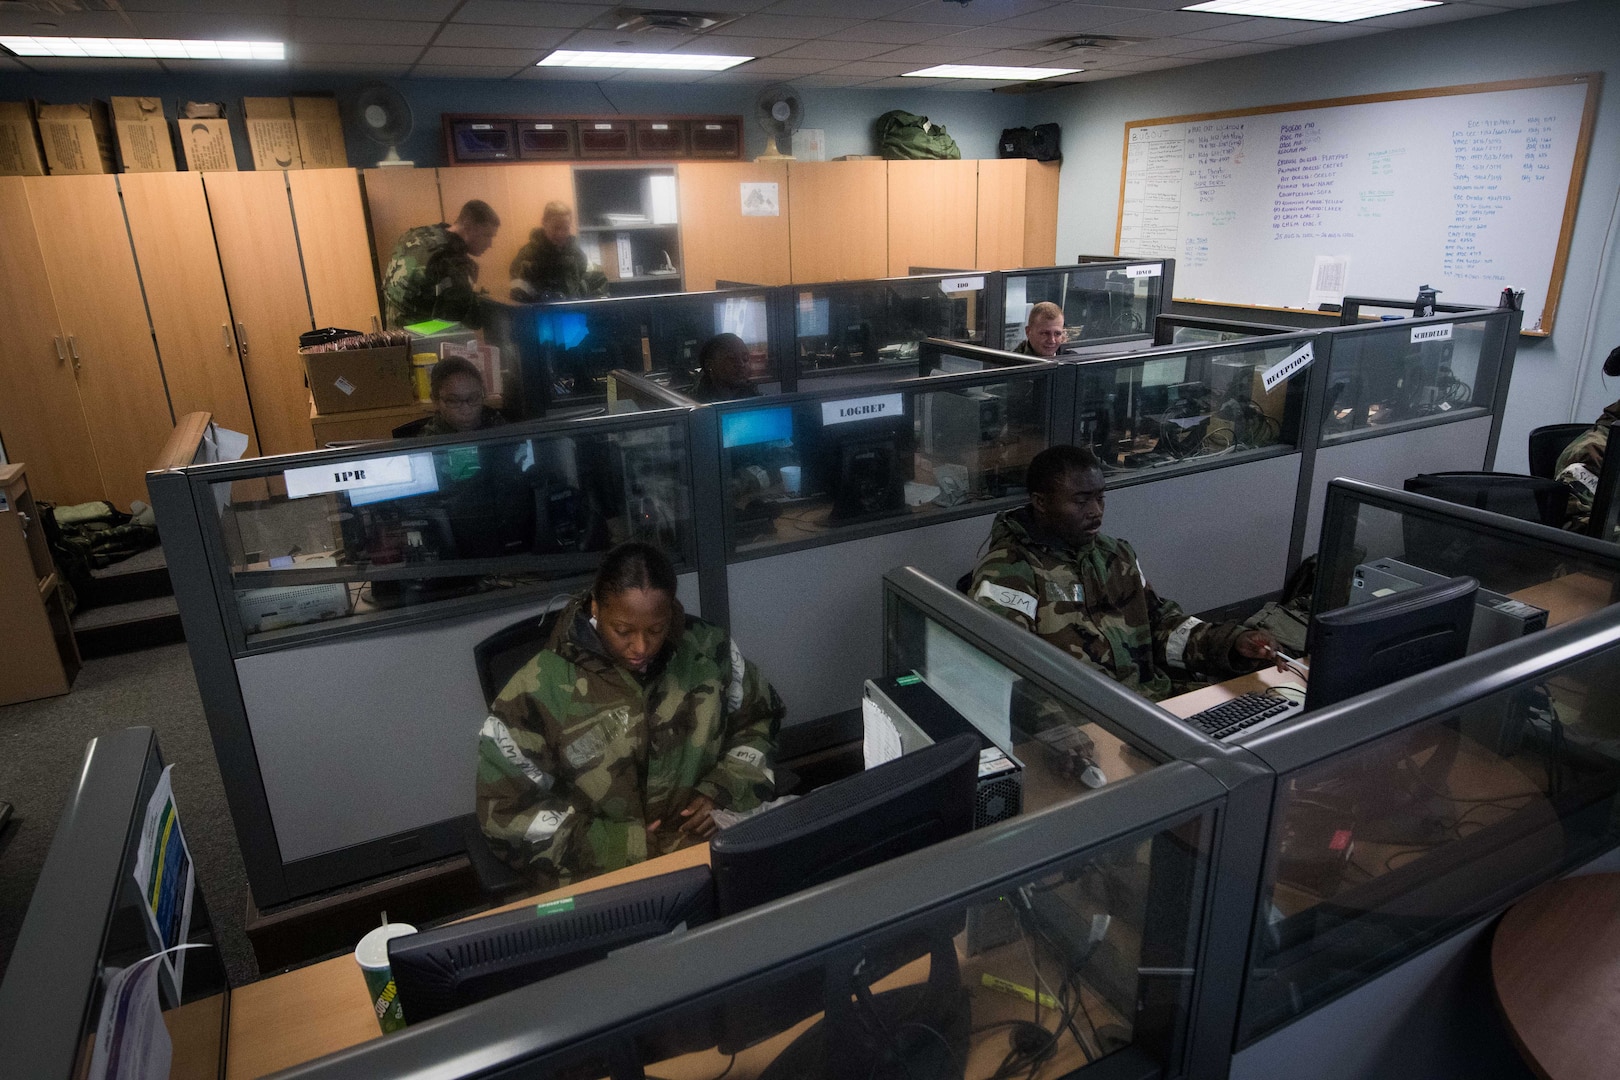 U.S. Airmen from the 51st Mission Support Group work inside of the Deployment Readiness Control Center (DRCC) during Exercise Beverly Herd 16-2 at Osan Air Base, Republic of Korea, Aug. 26, 2016. Team Osan’s DRCC serves as the hub for Airmen, cargo and equipment that deploy to and from Osan during exercises and real world contingencies. (U.S. Air Force photo by Senior Airman Dillian Bamman)